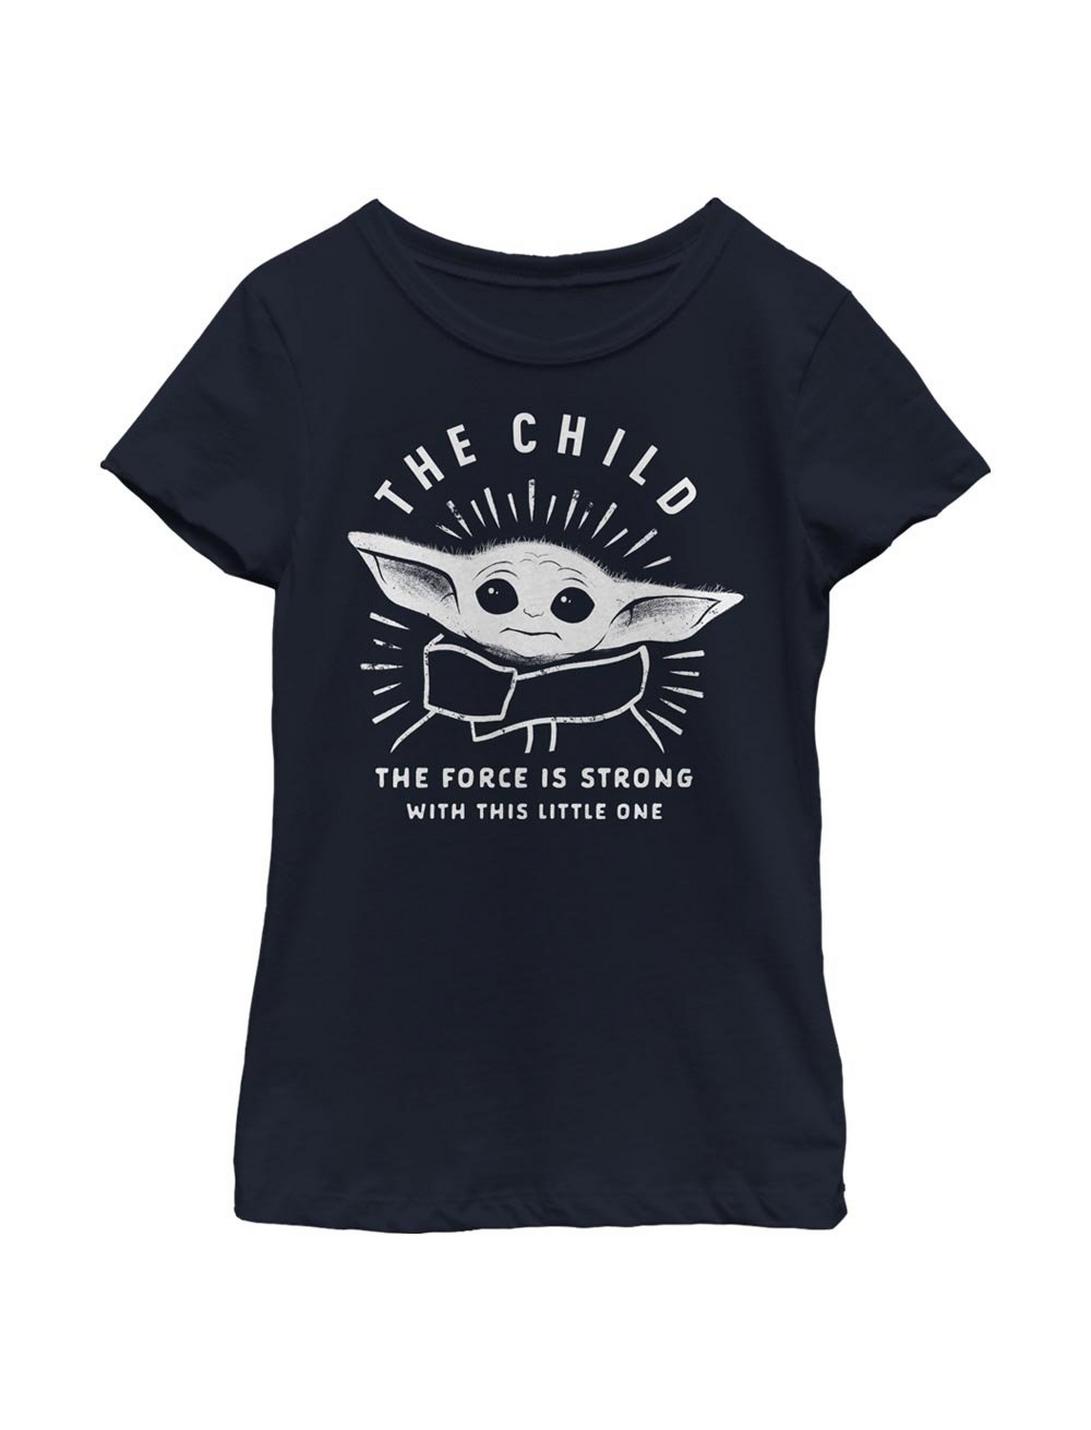 Star Wars The Mandalorian The Child Little One Youth Girls T-Shirt, NAVY, hi-res